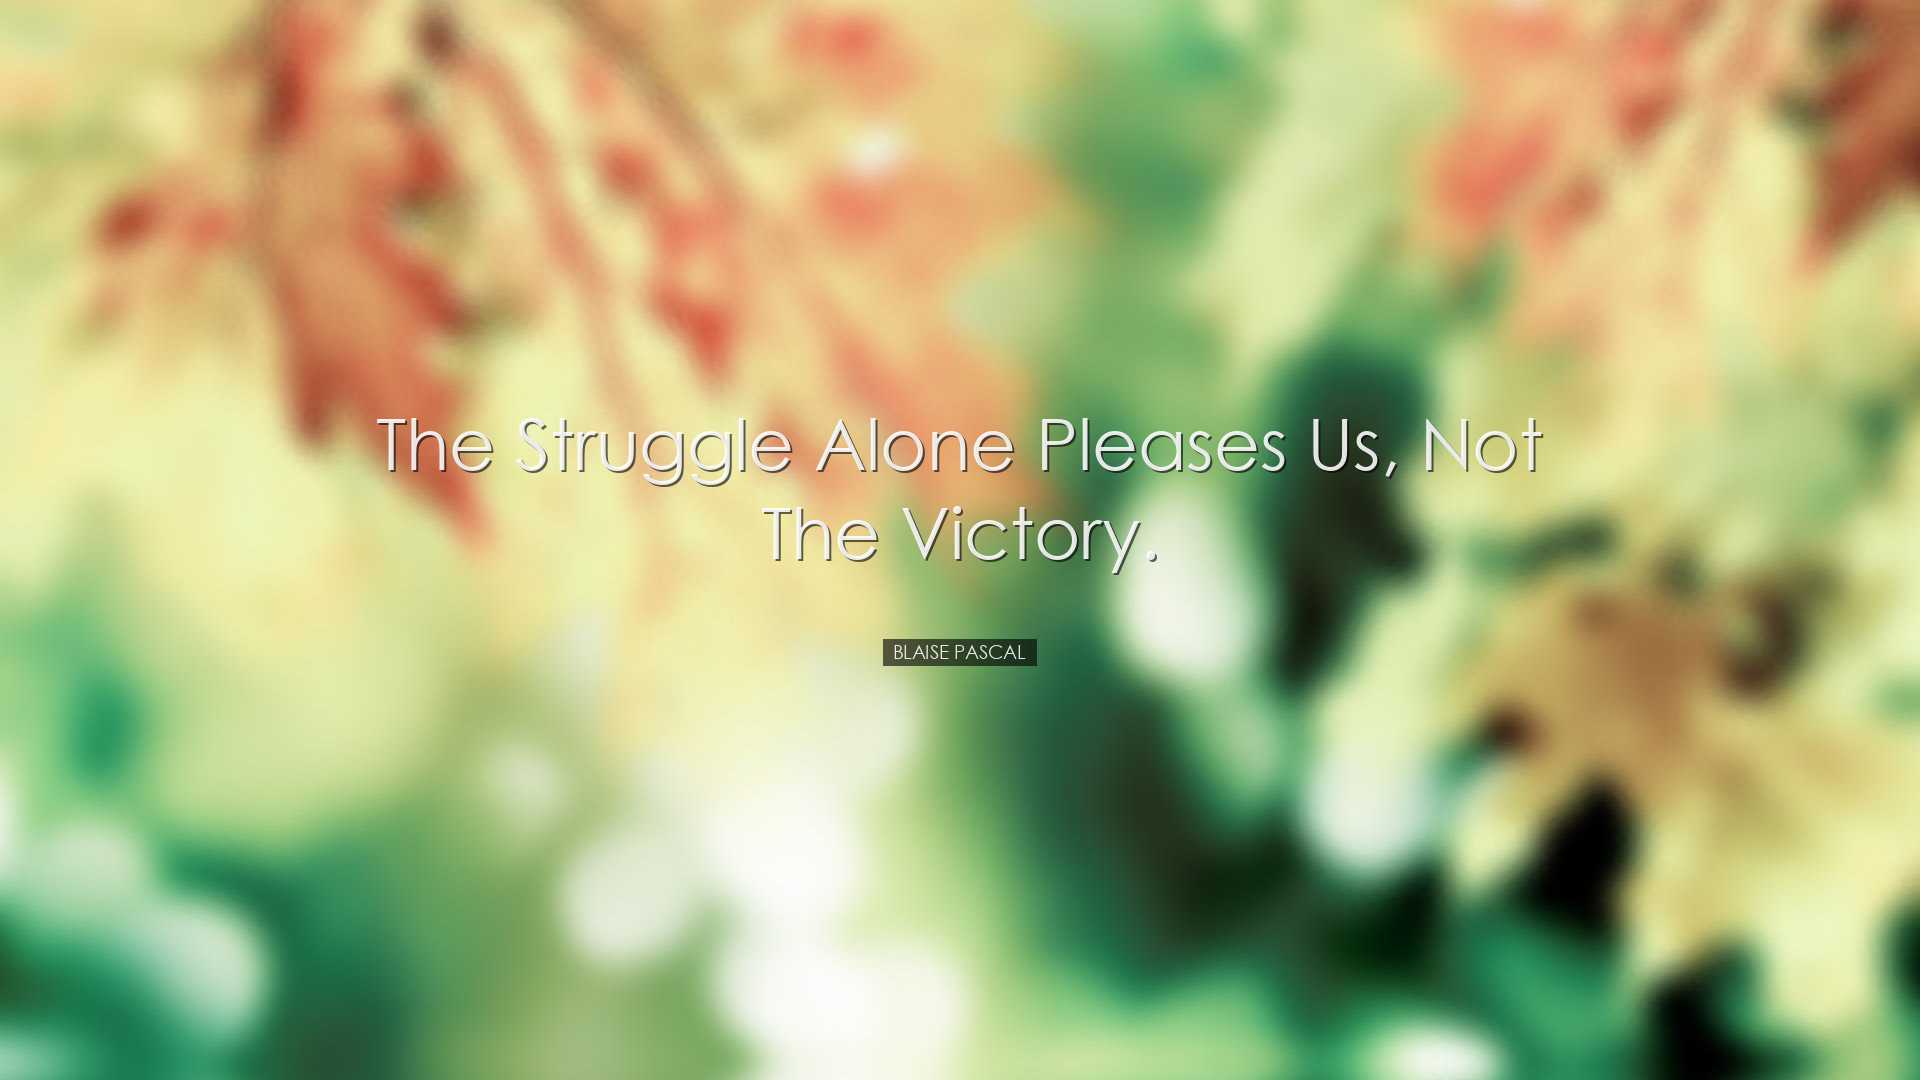 The struggle alone pleases us, not the victory. - Blaise Pascal